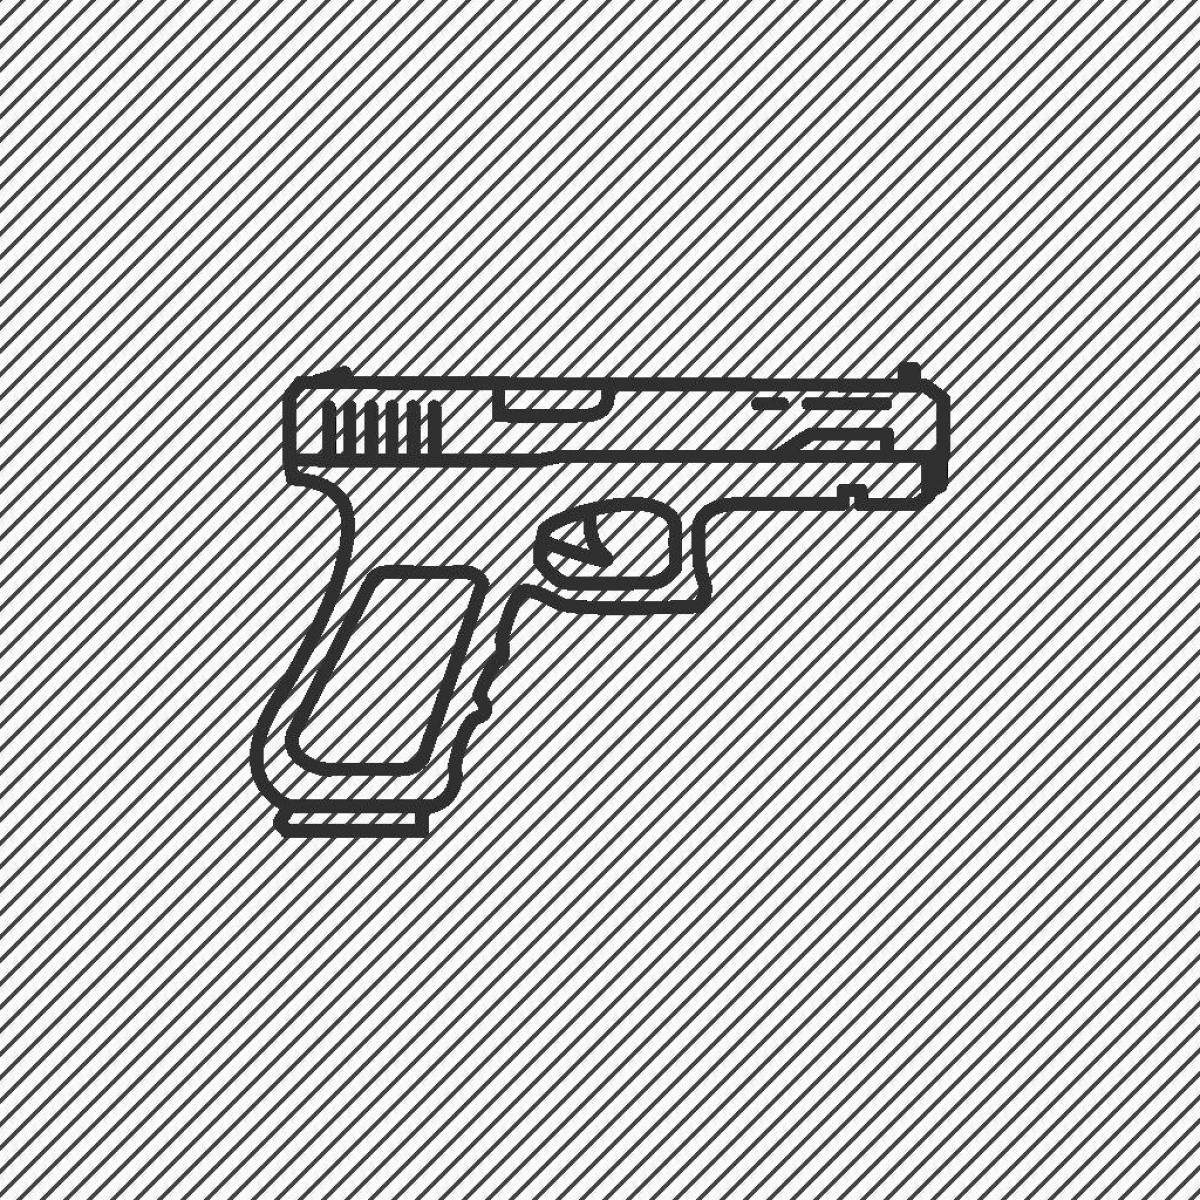 Dynamic glock coloring page